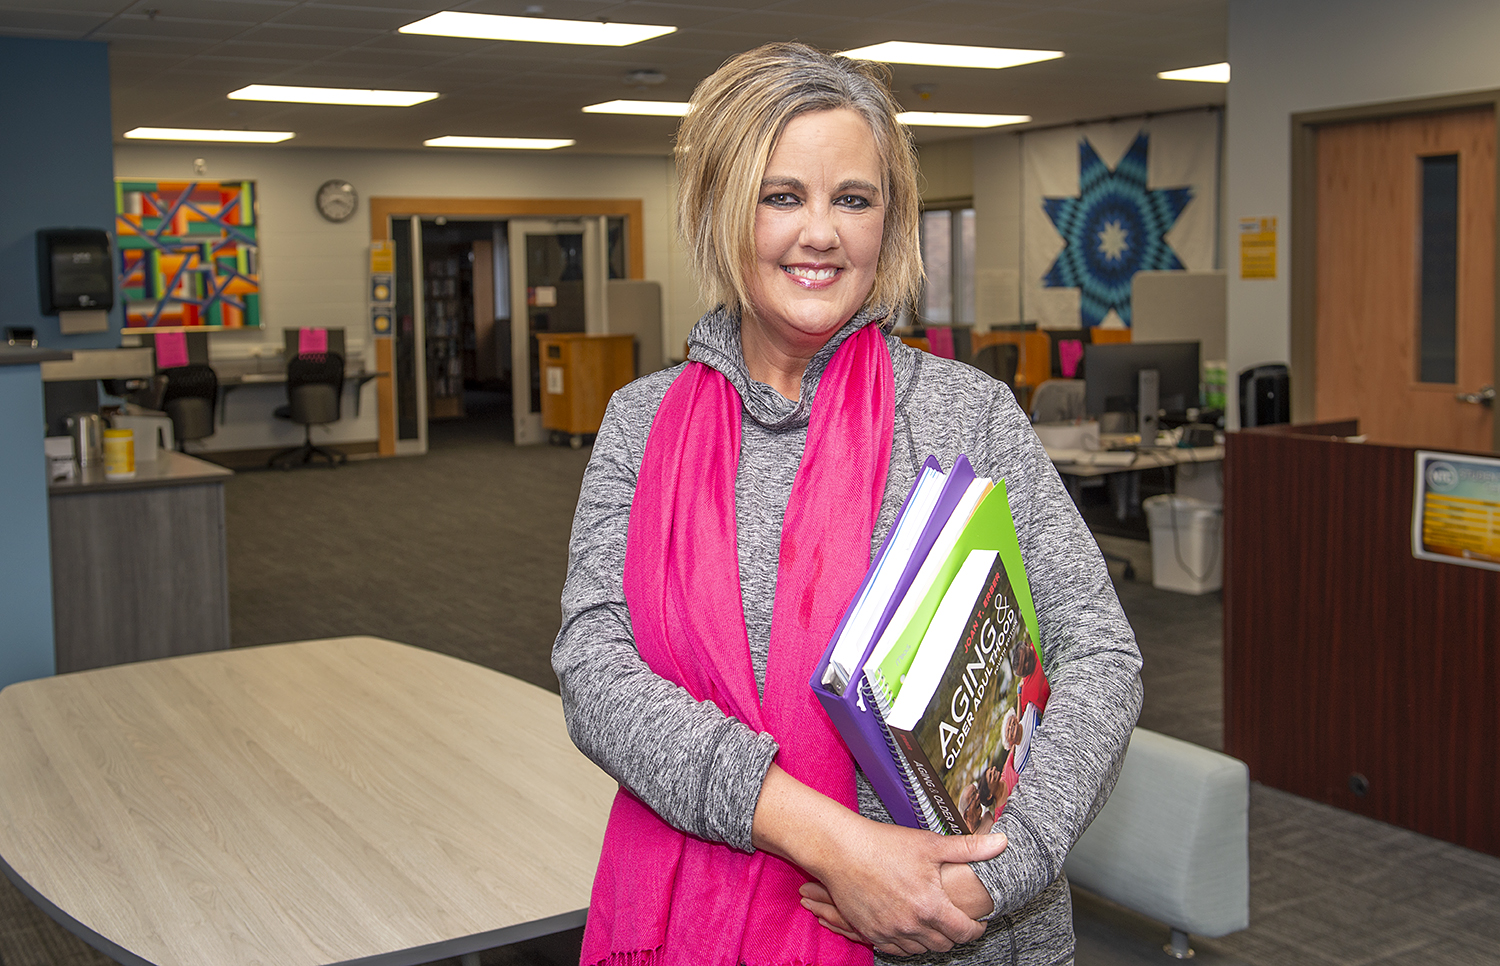 Kari Kuechenmeister, a nontraditional student at Northwest Technical college earns a health science degree and certificates in gerontology and community health.